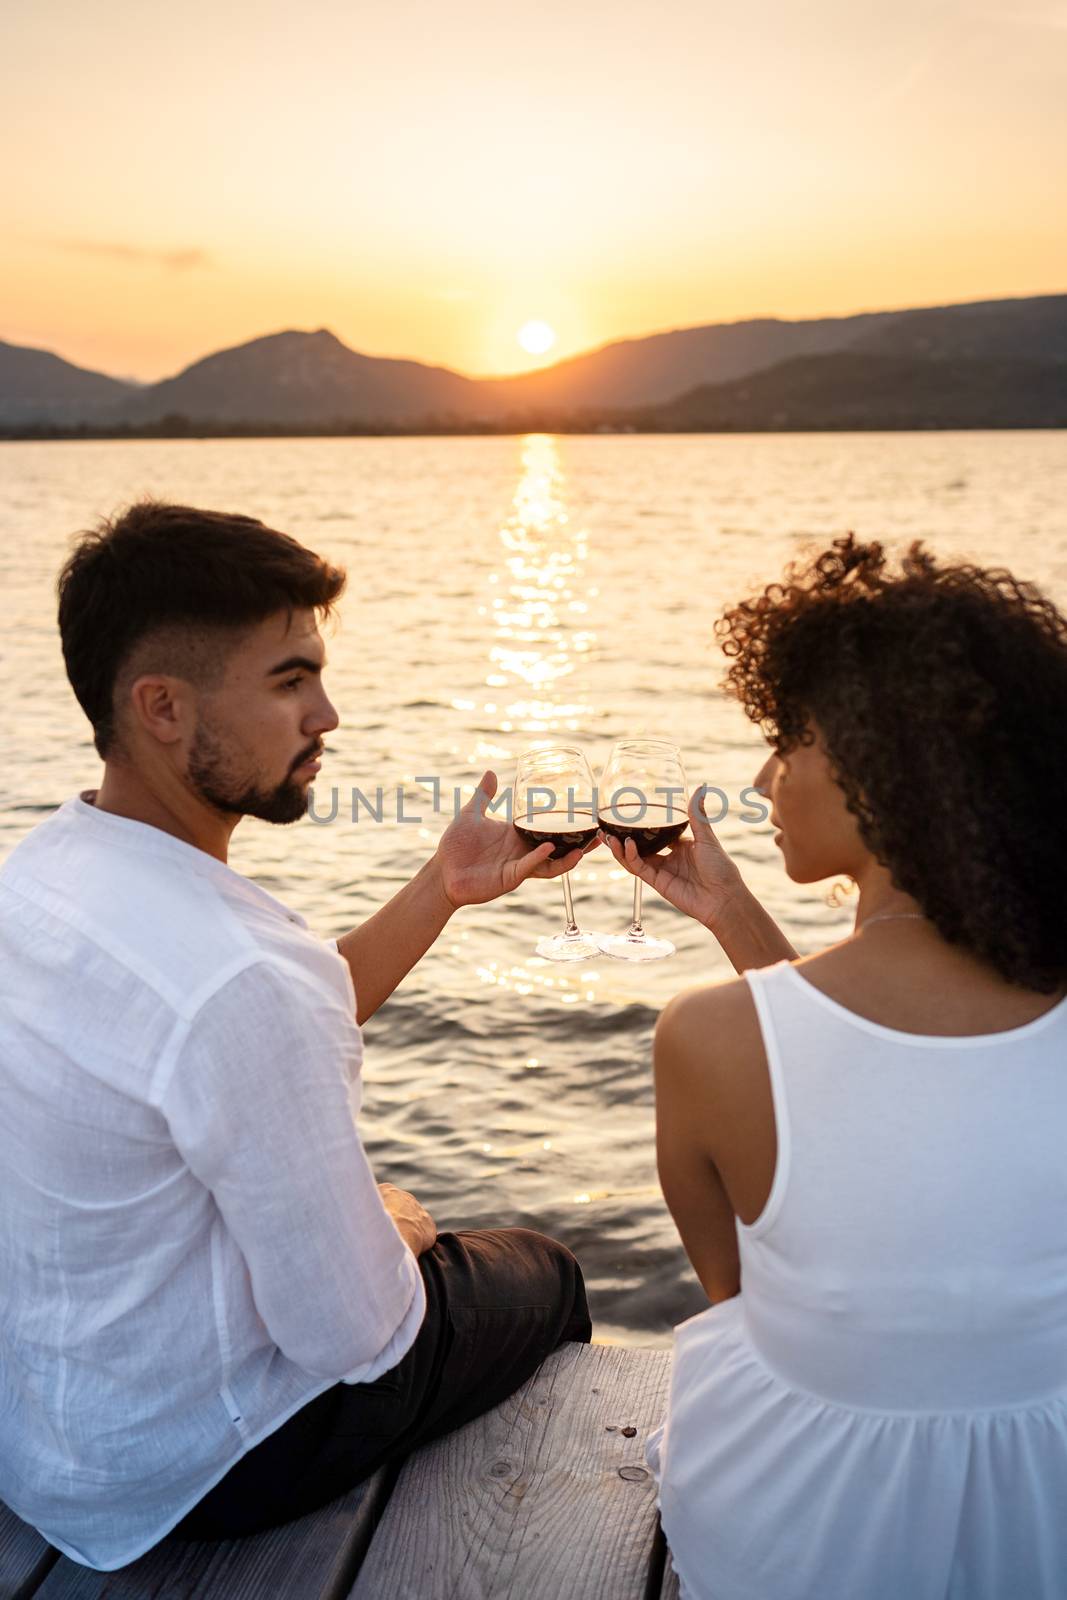 Romance scene of multiracial couple sitting on a pier at sunset or dawn toasting with red wine looking each other in the eyes - Attractive man bonding with her Hispanic girlfriend - Focus on glasses by robbyfontanesi